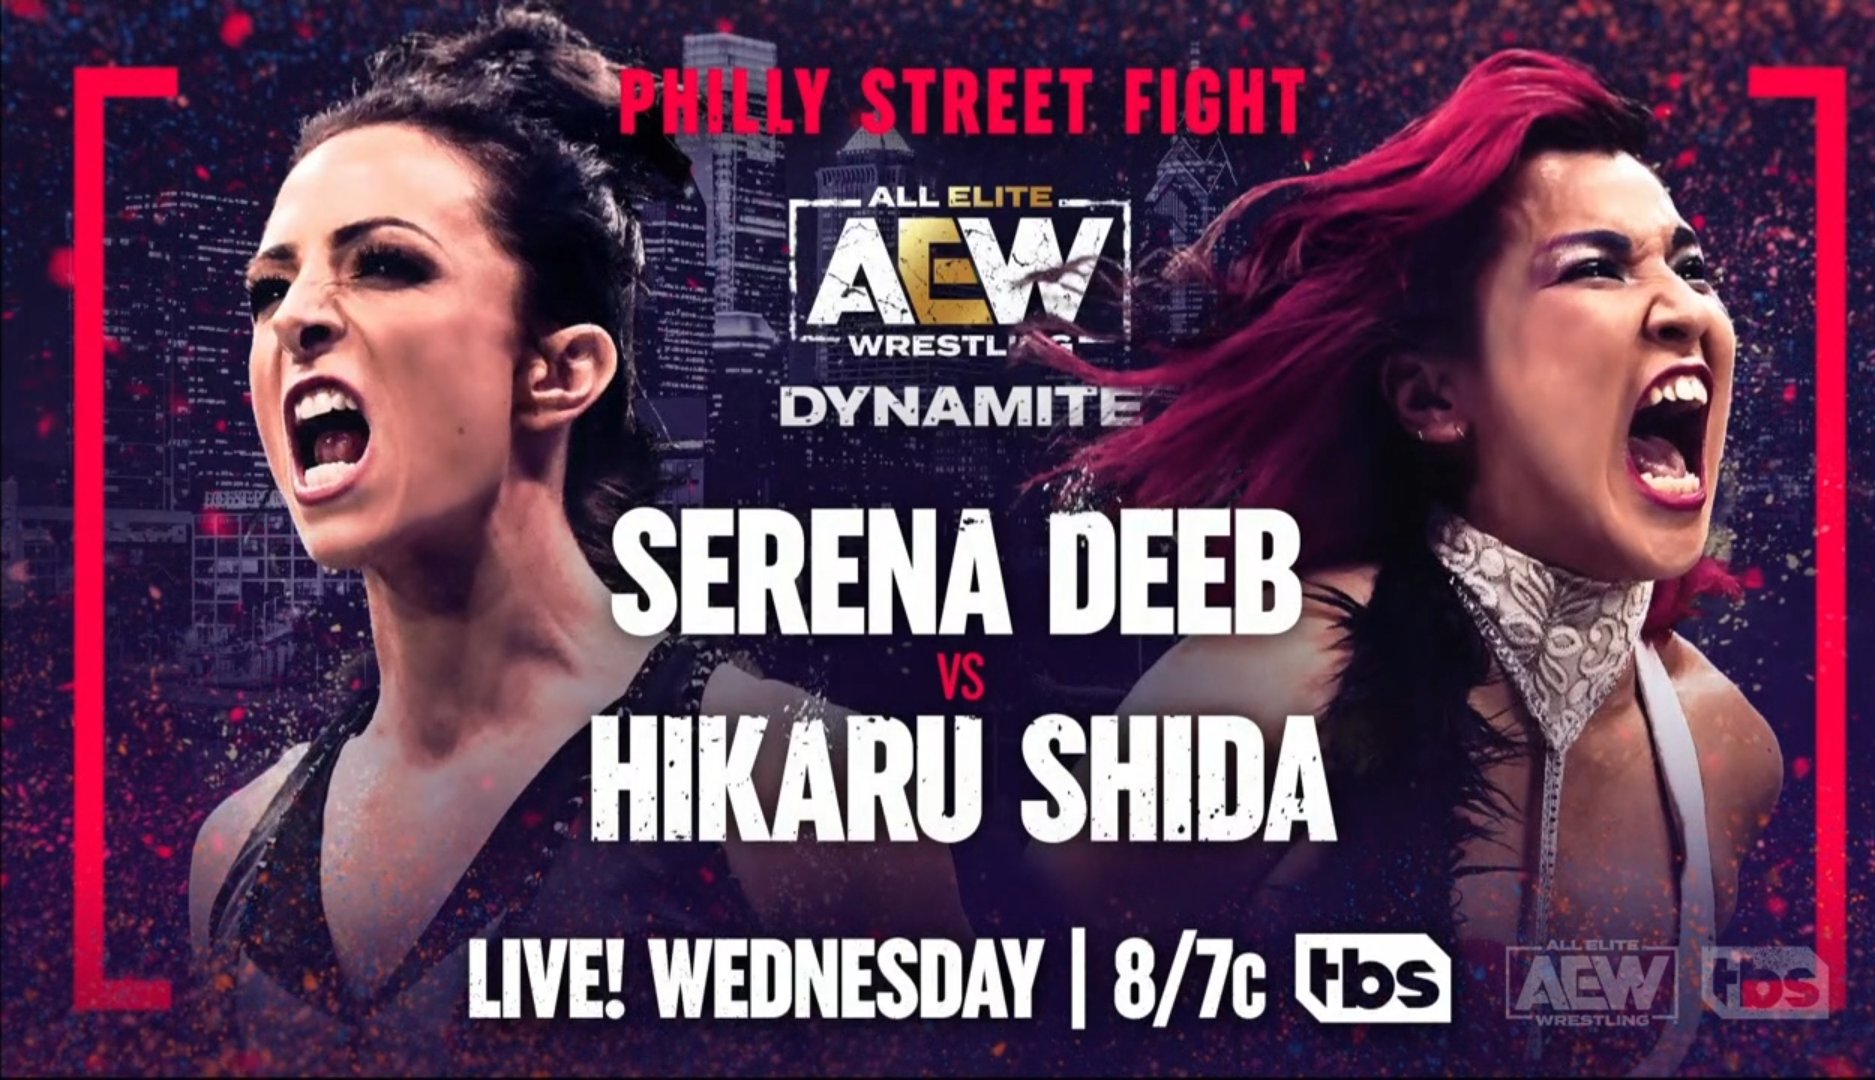 Philly Street Fight set for April 27 Dynamite | Diva Dirt